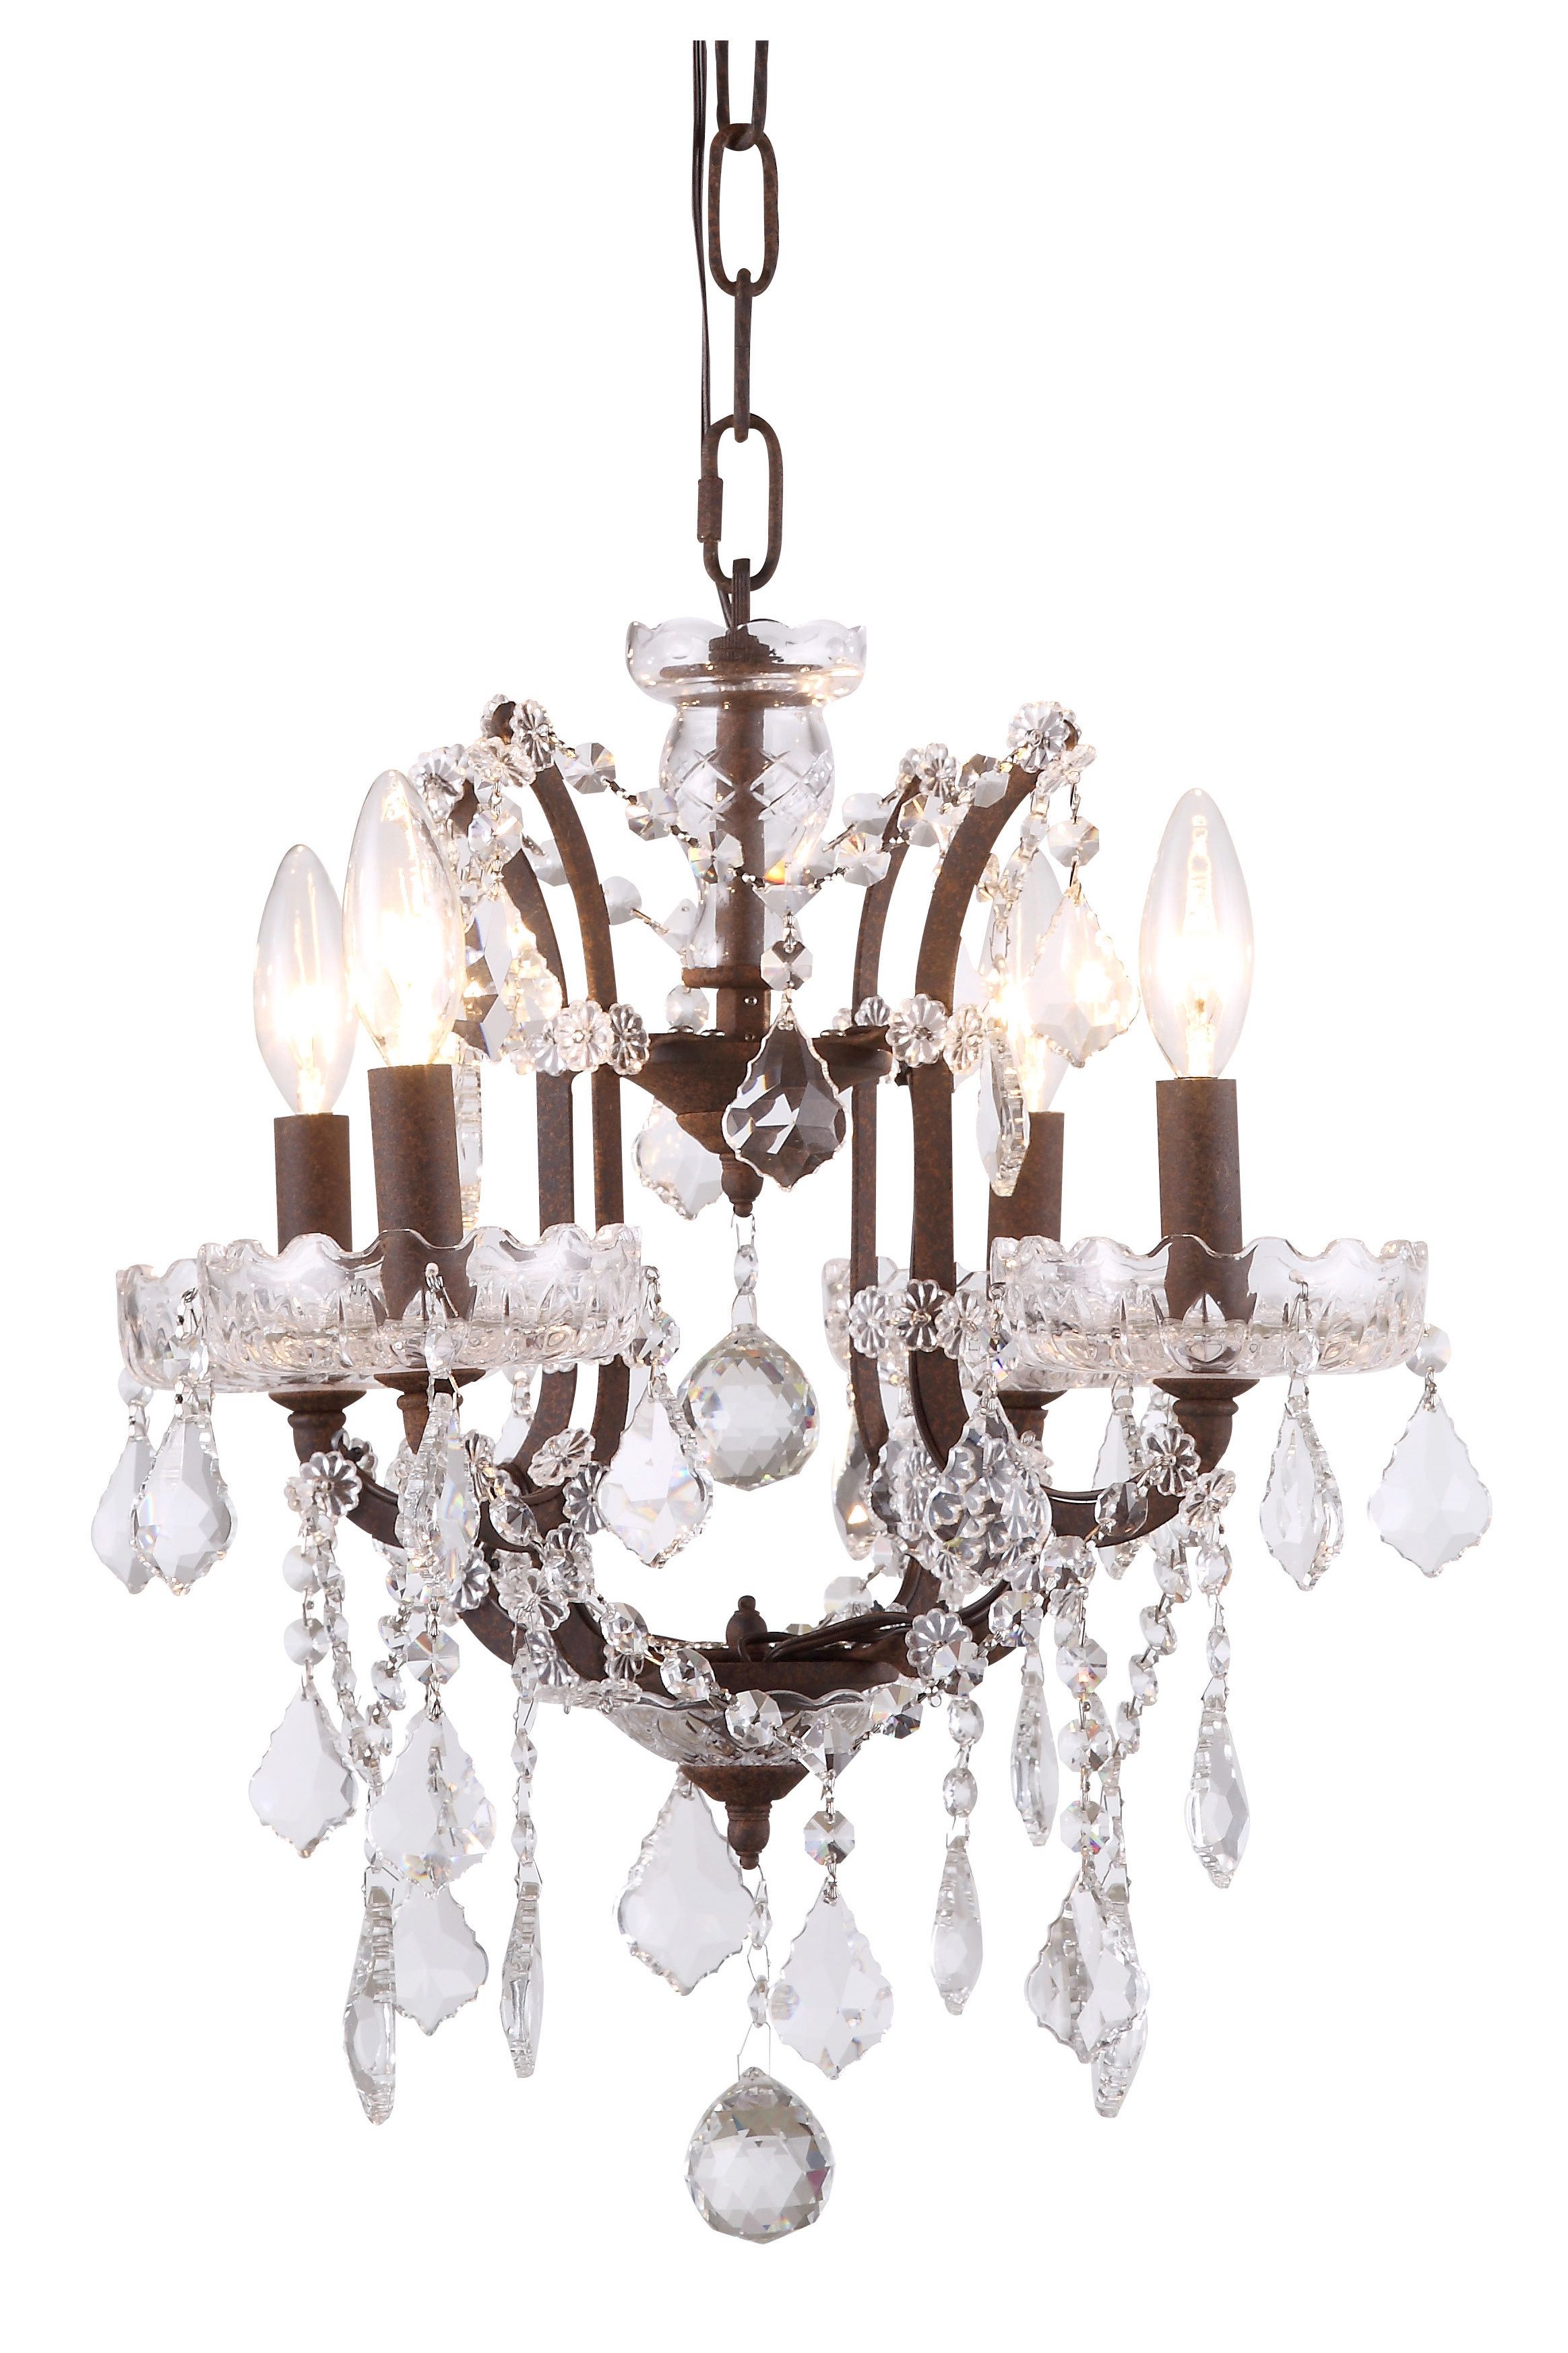 Well Known Bennington 4 Light Candle Style Chandeliers Regarding Grabowski 4 Light Candle Style Chandelier (View 11 of 25)